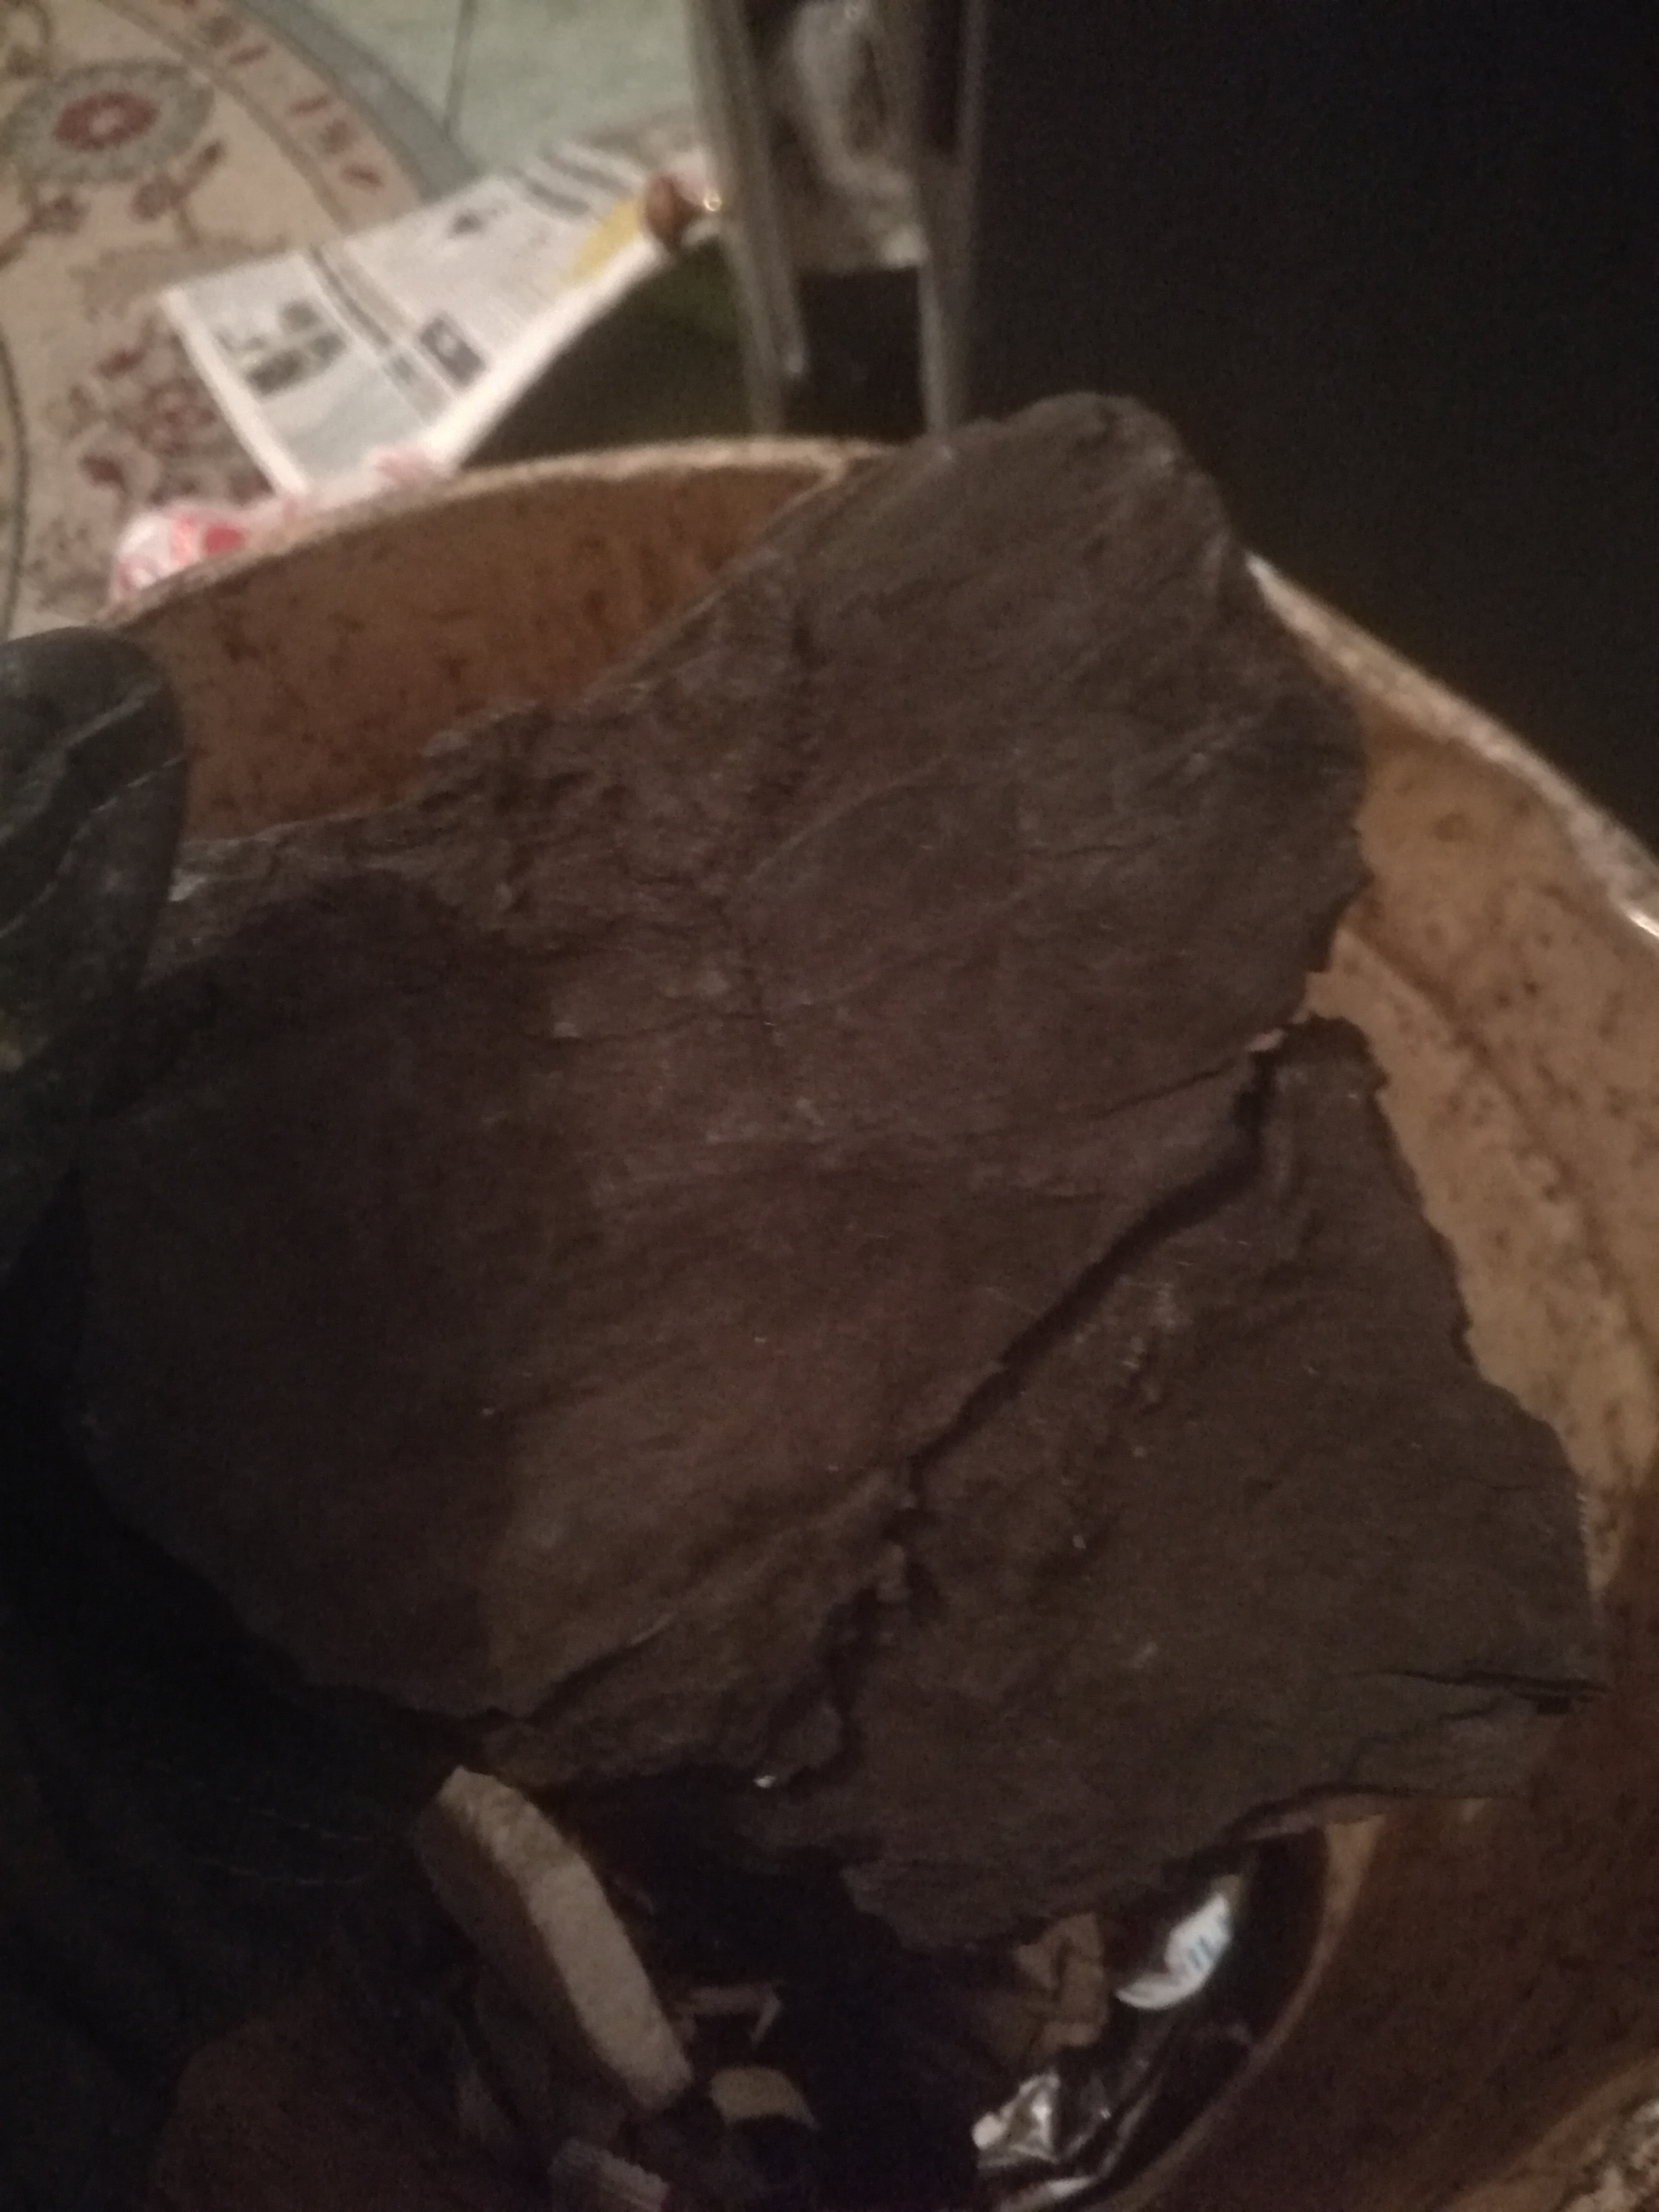 Brown coal (lignite) is a soft brown combustible sedimentary rock